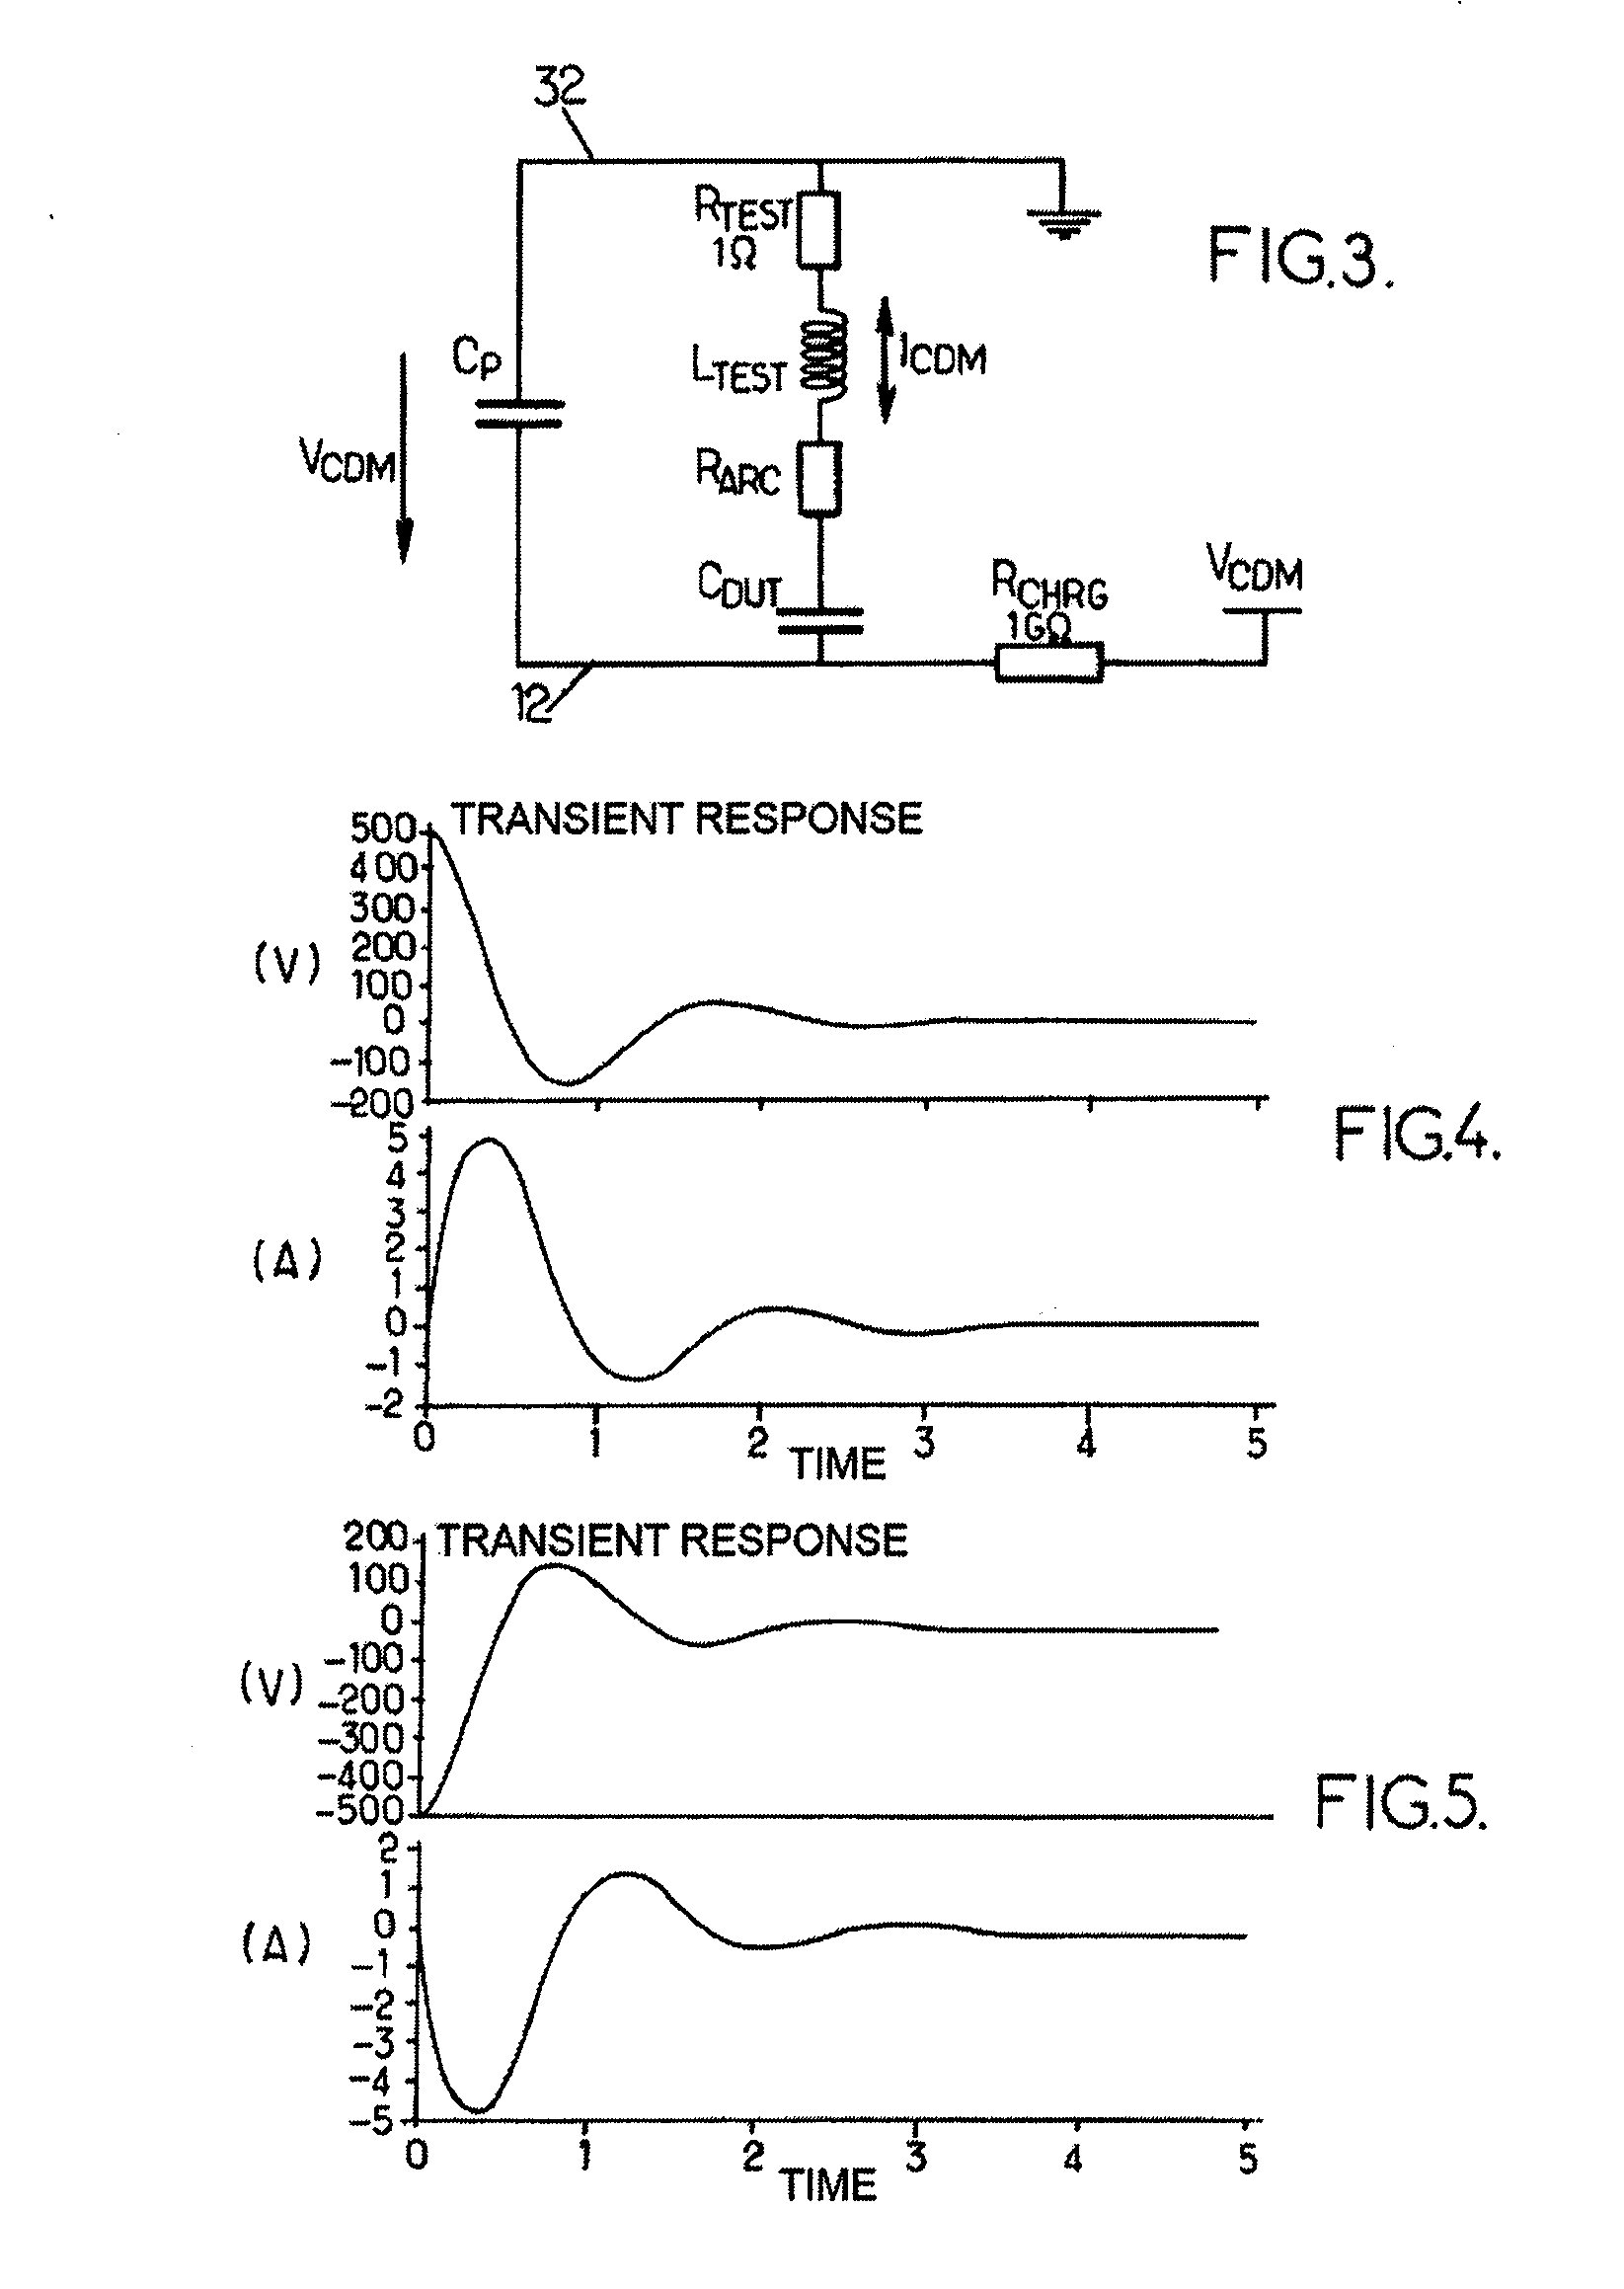 Protection of integrated electronic circuits from electrostatic discharge